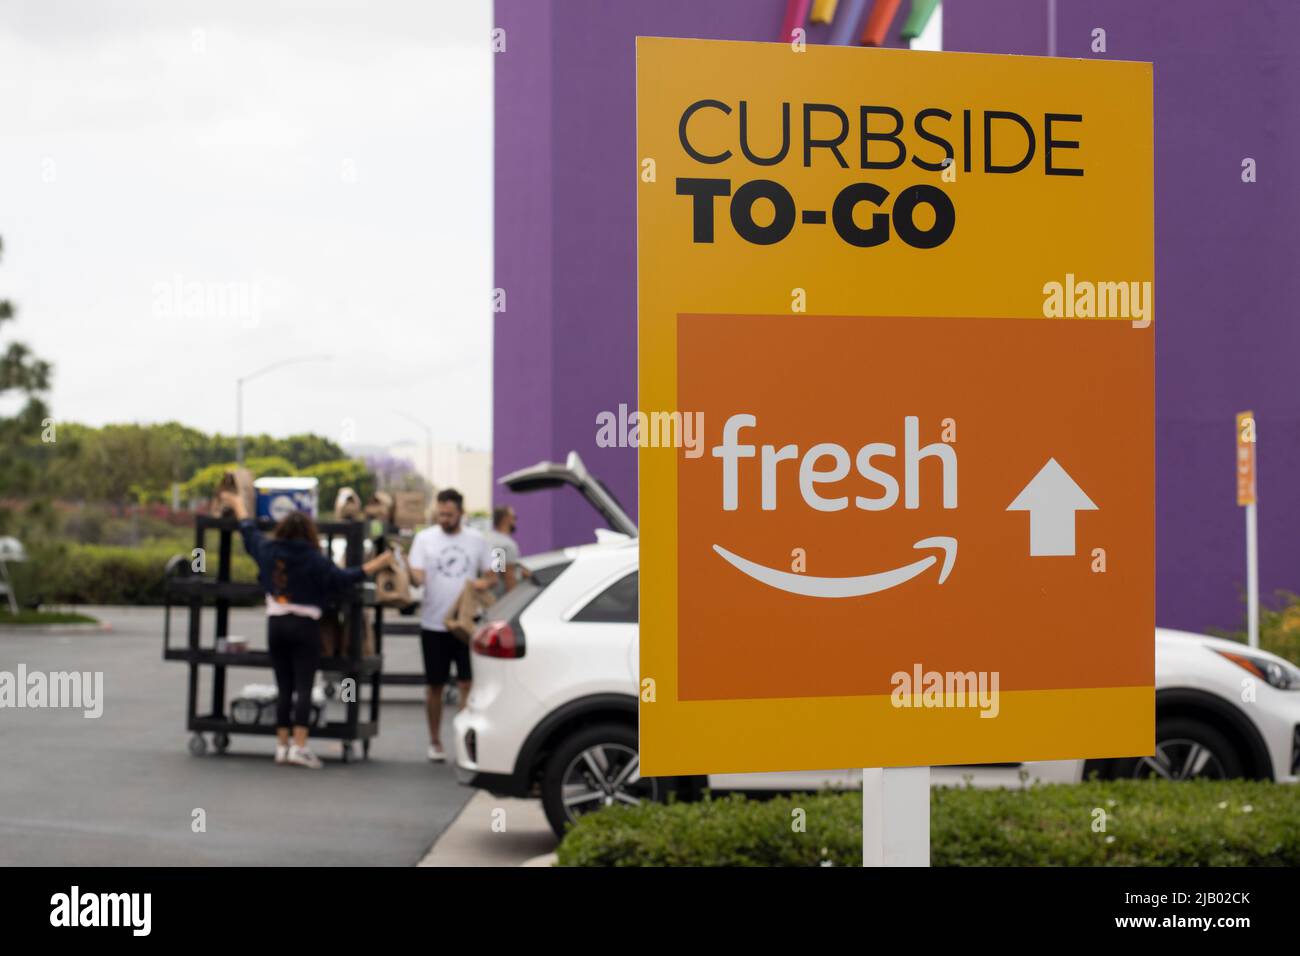 Curbside To-Go directional sign in a parking lot outside an Amazon Fresh grocery store in Irvine, California, seen on Sunday, May 8, 2022. Stock Photo